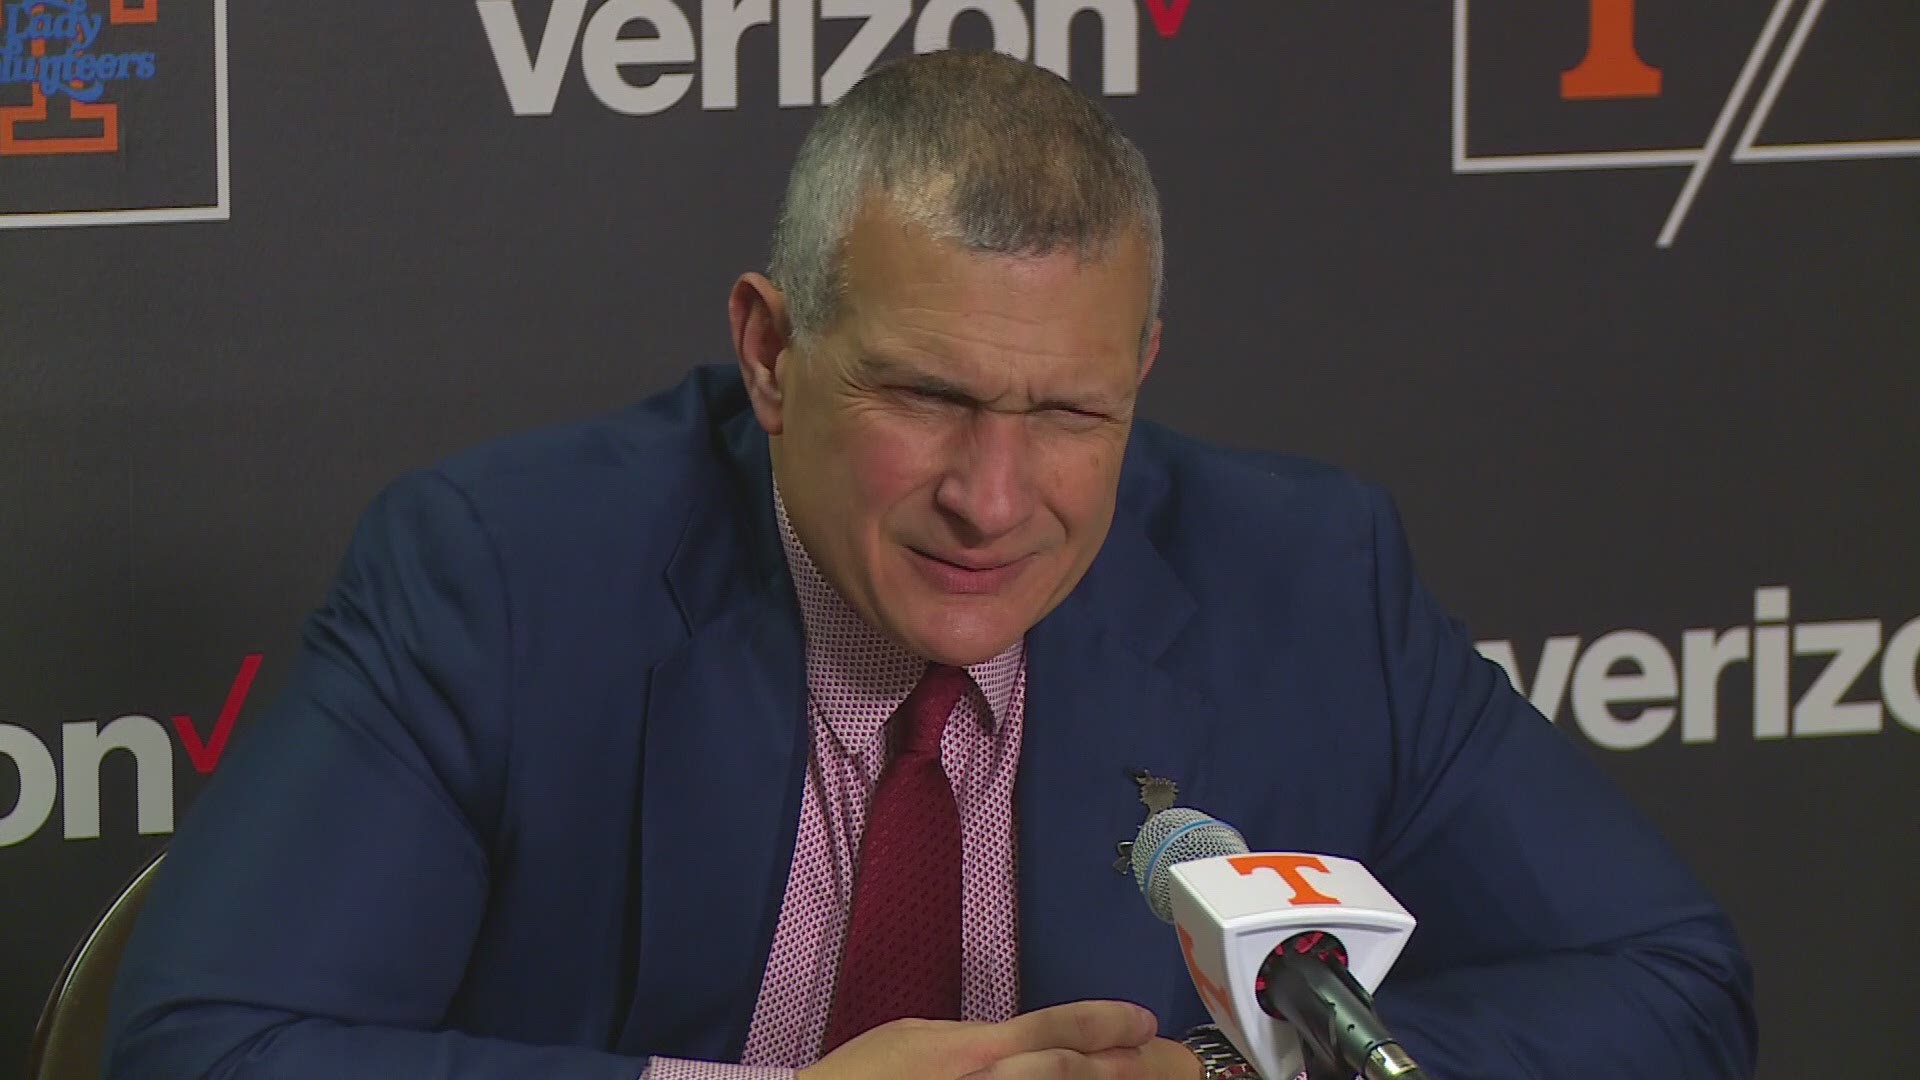 USC head basketball coach Frank Martin reacts to the decision by Evan Hinson to give up basketball and put his entire focus on football.